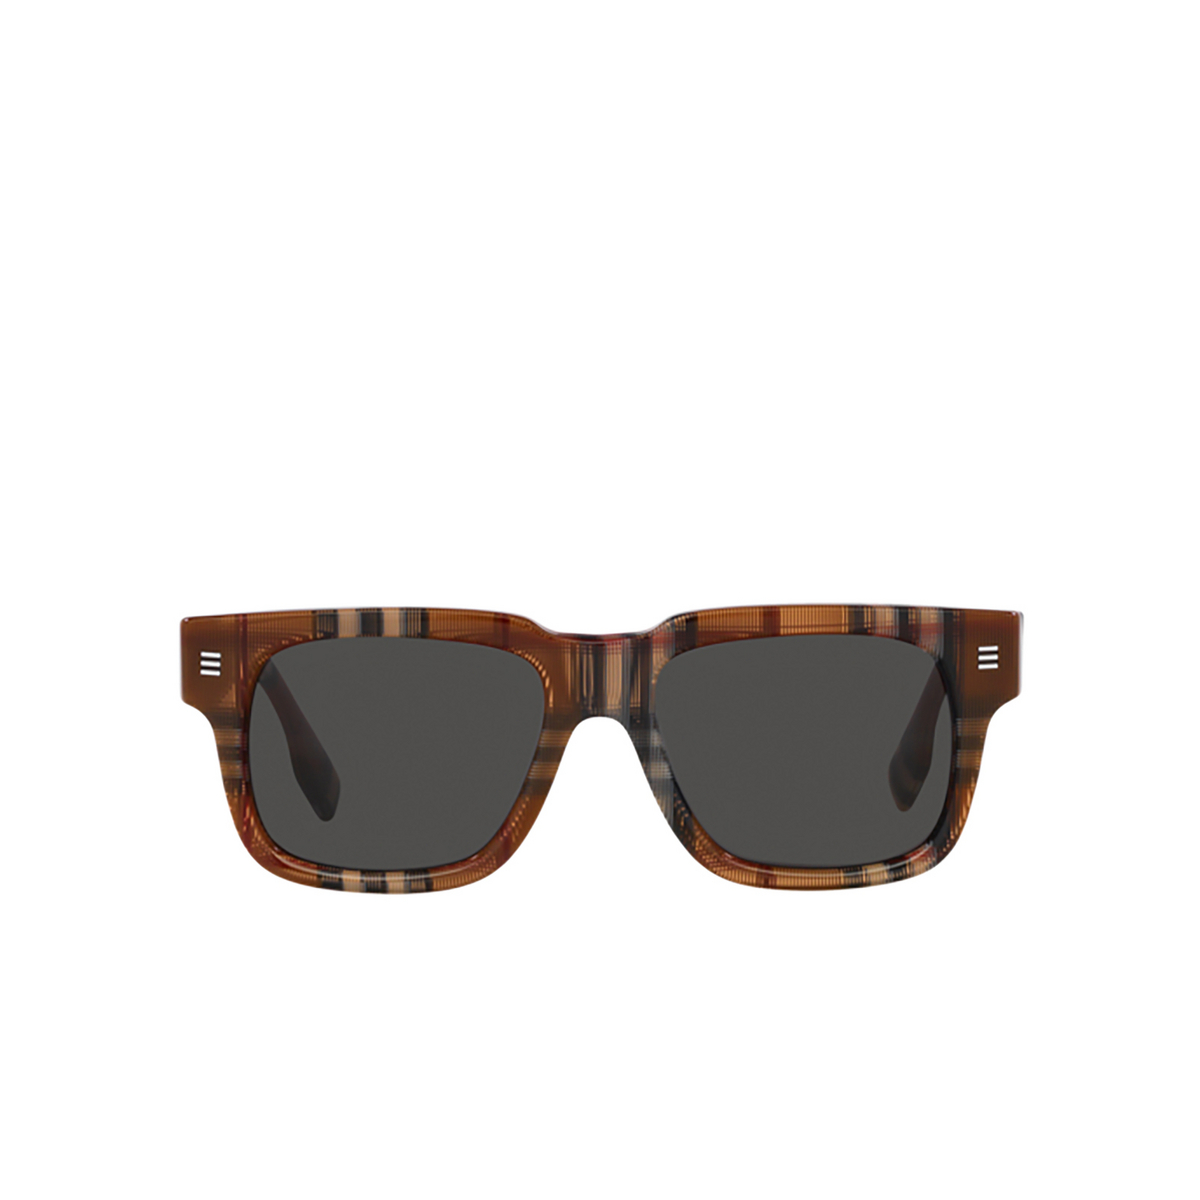 Burberry HAYDEN Sunglasses 396687 Check Brown - front view